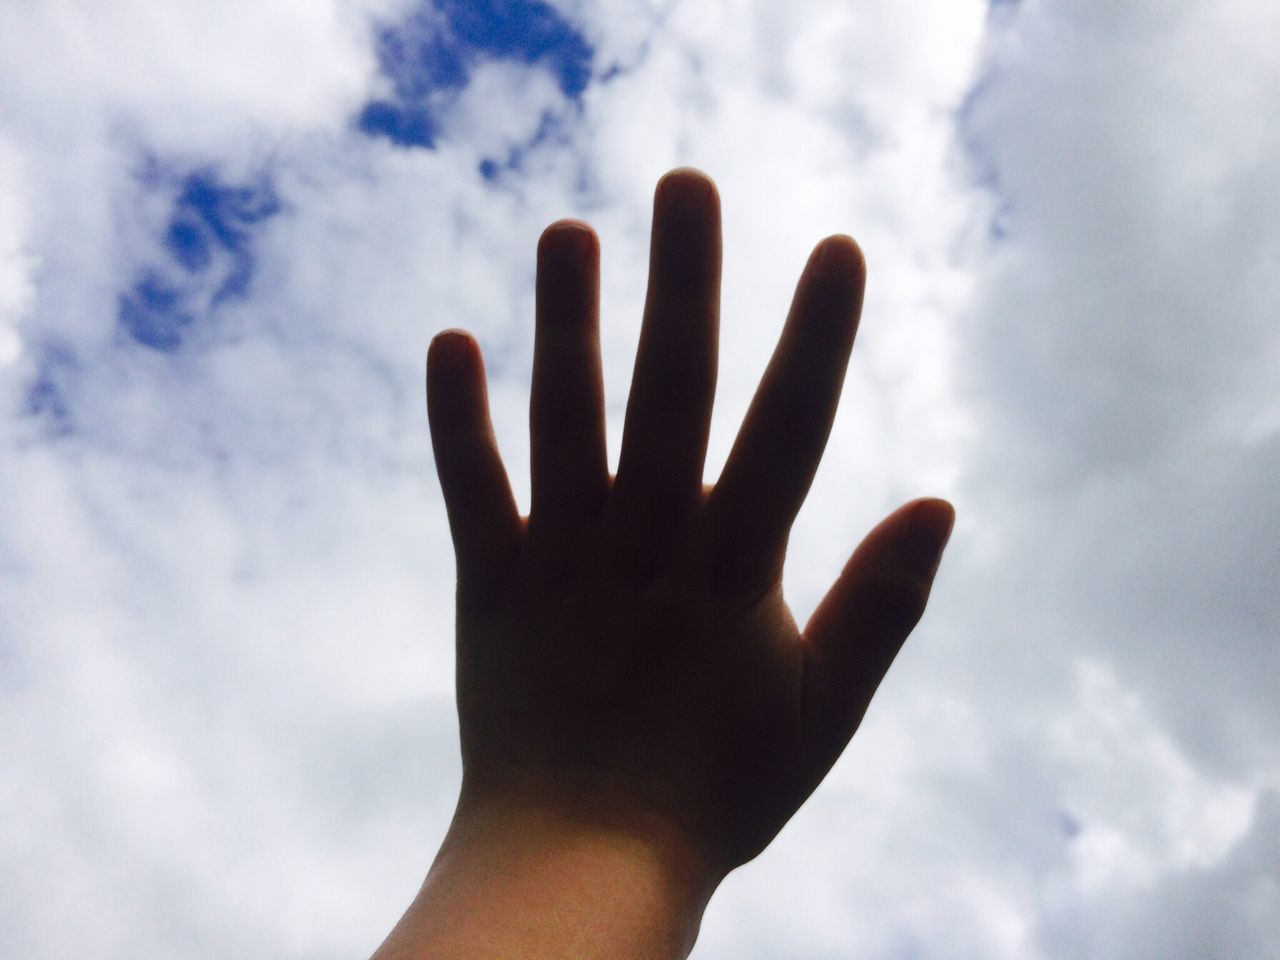 human hand, human body part, low angle view, cloud - sky, one person, palm, sky, real people, day, outdoors, adults only, people, adult